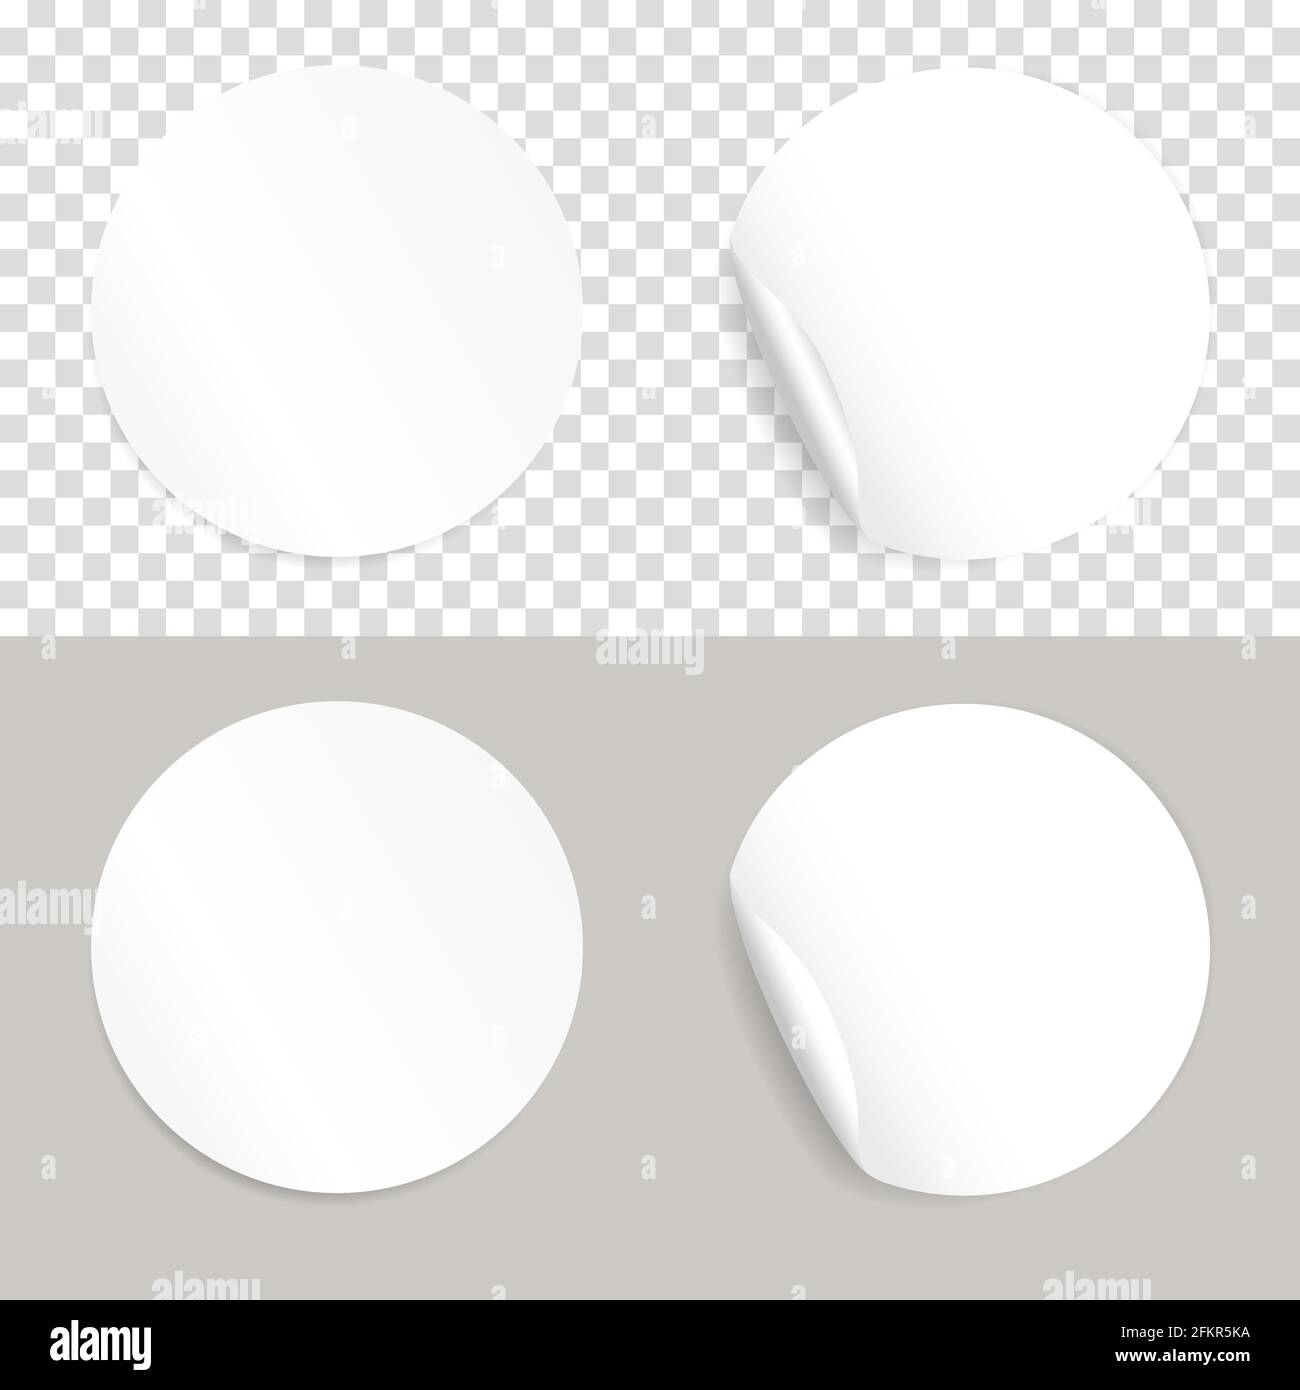 Round white realistic stickers. Circle sticker isolate set with folded edges, blank adhesive rounded tags or price signs with shadow Stock Vector